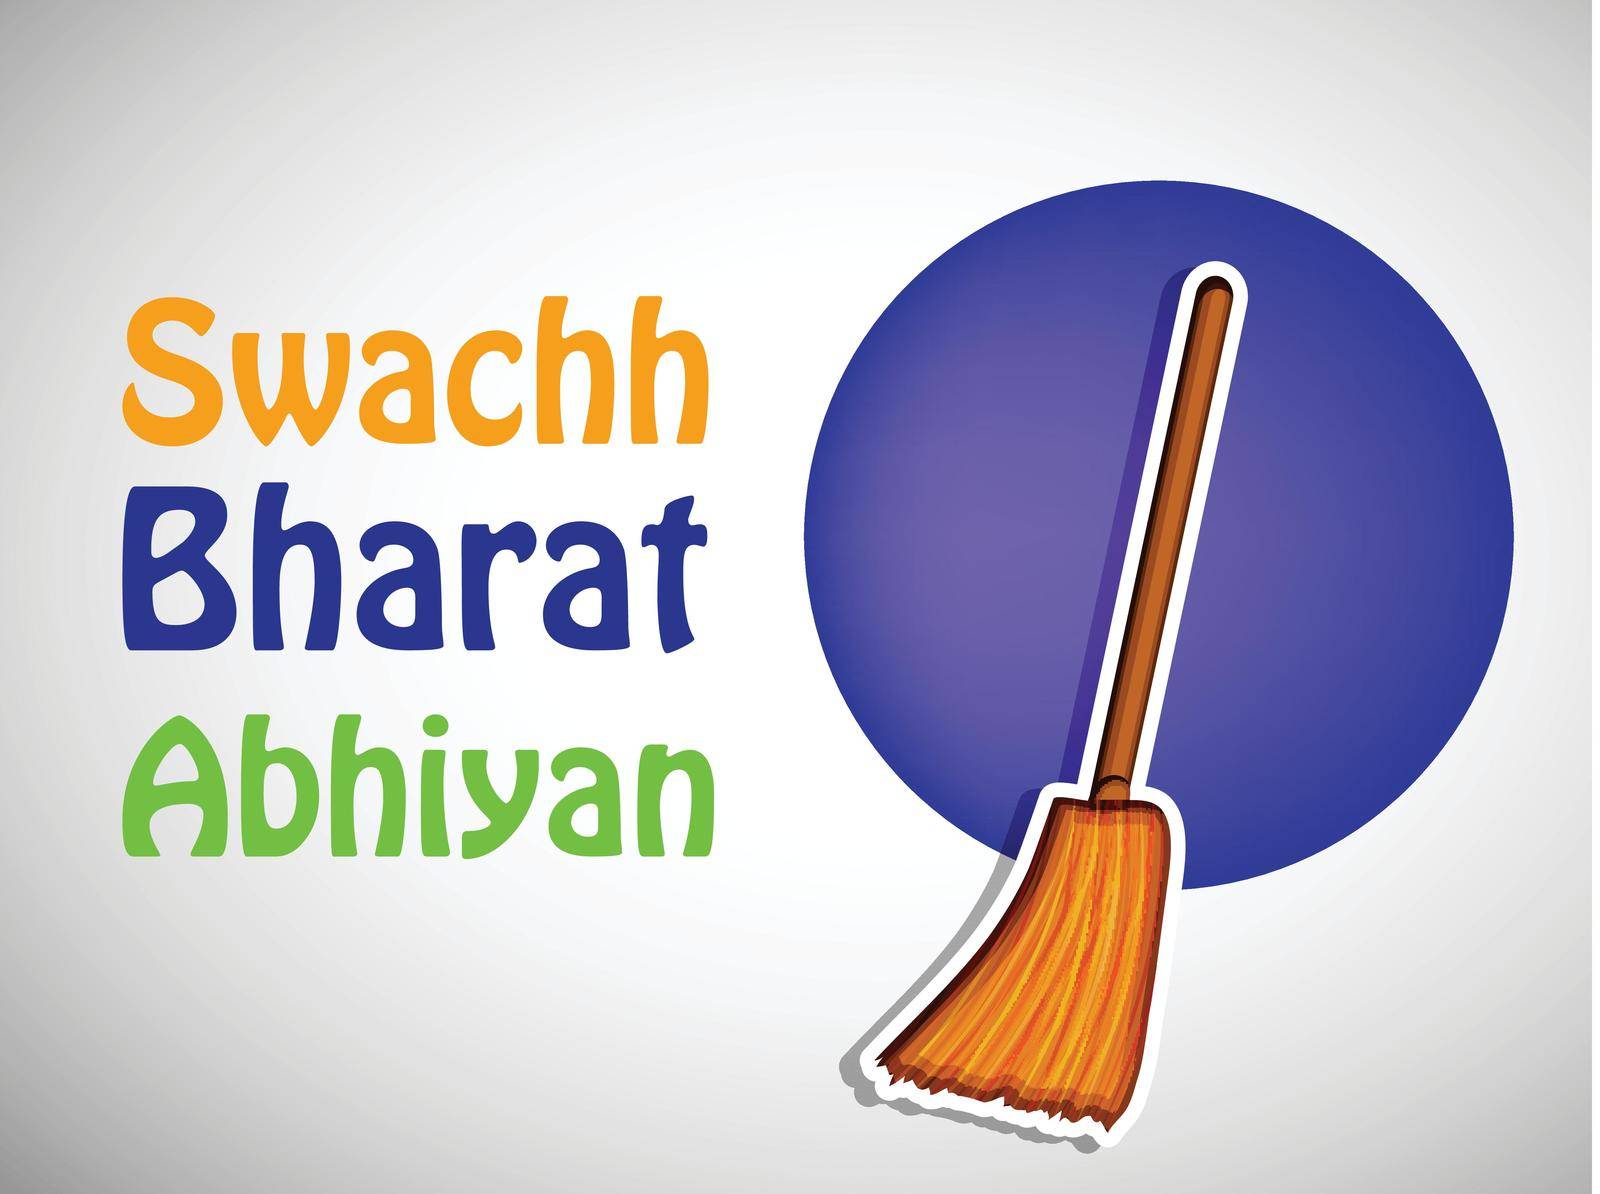 Swachh Bharat Abhiyan, or Clean India Mission is a country-wide campaign initiated by the Government of India in 2014 to eliminate open defecation and improve solid waste management